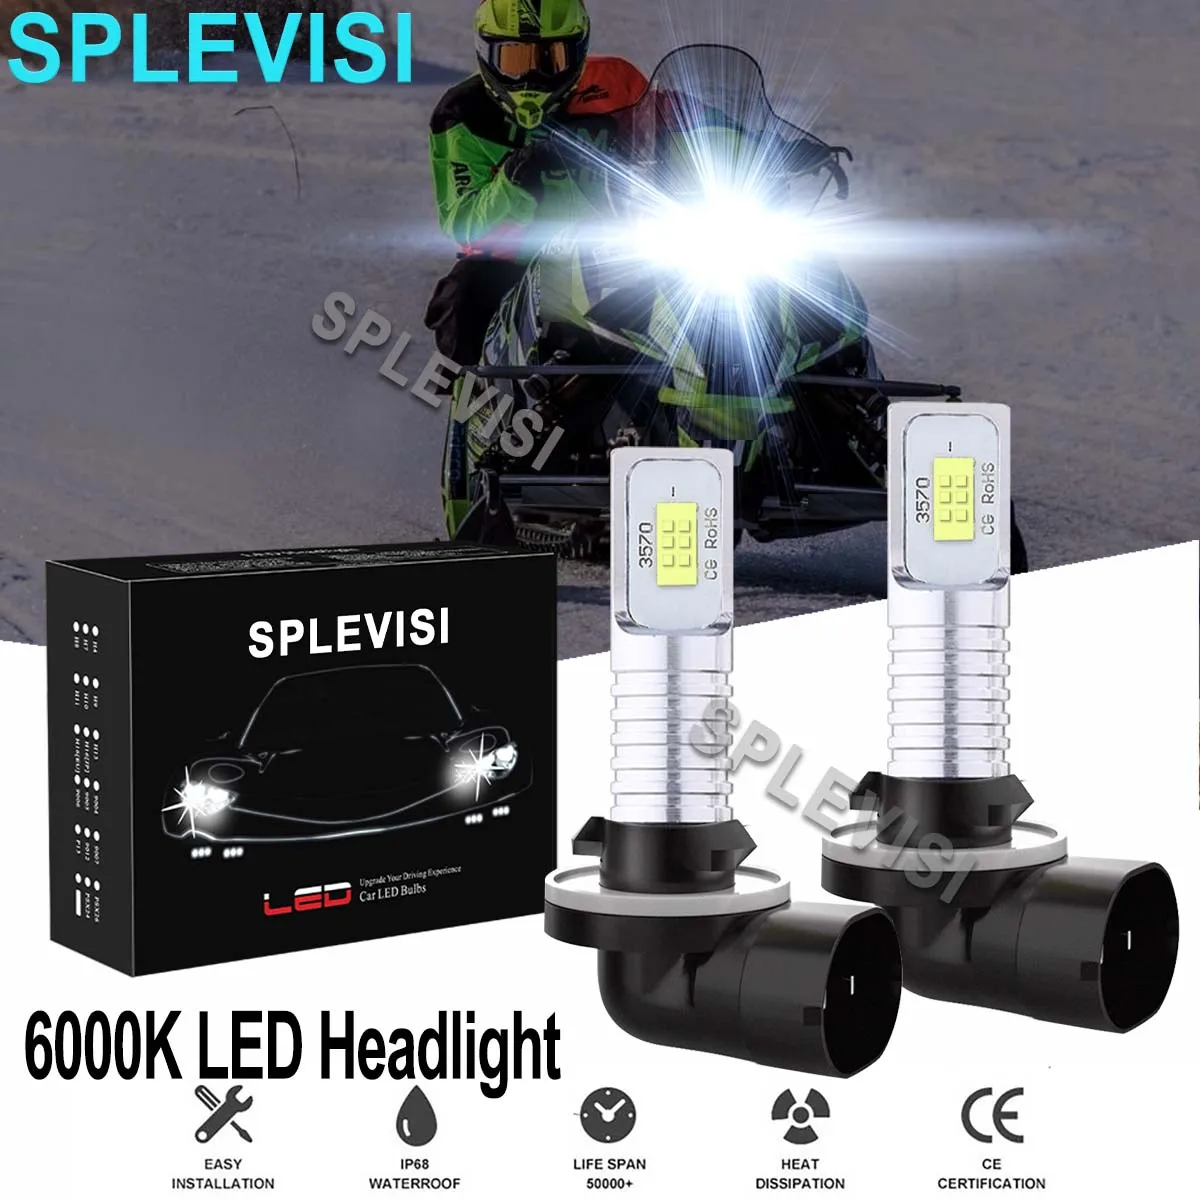 2x 70W 6000K Pure White LED Headlights Bulbs Kit For Arctic Cat Snowmobiles Crossfire 500 600 700 800